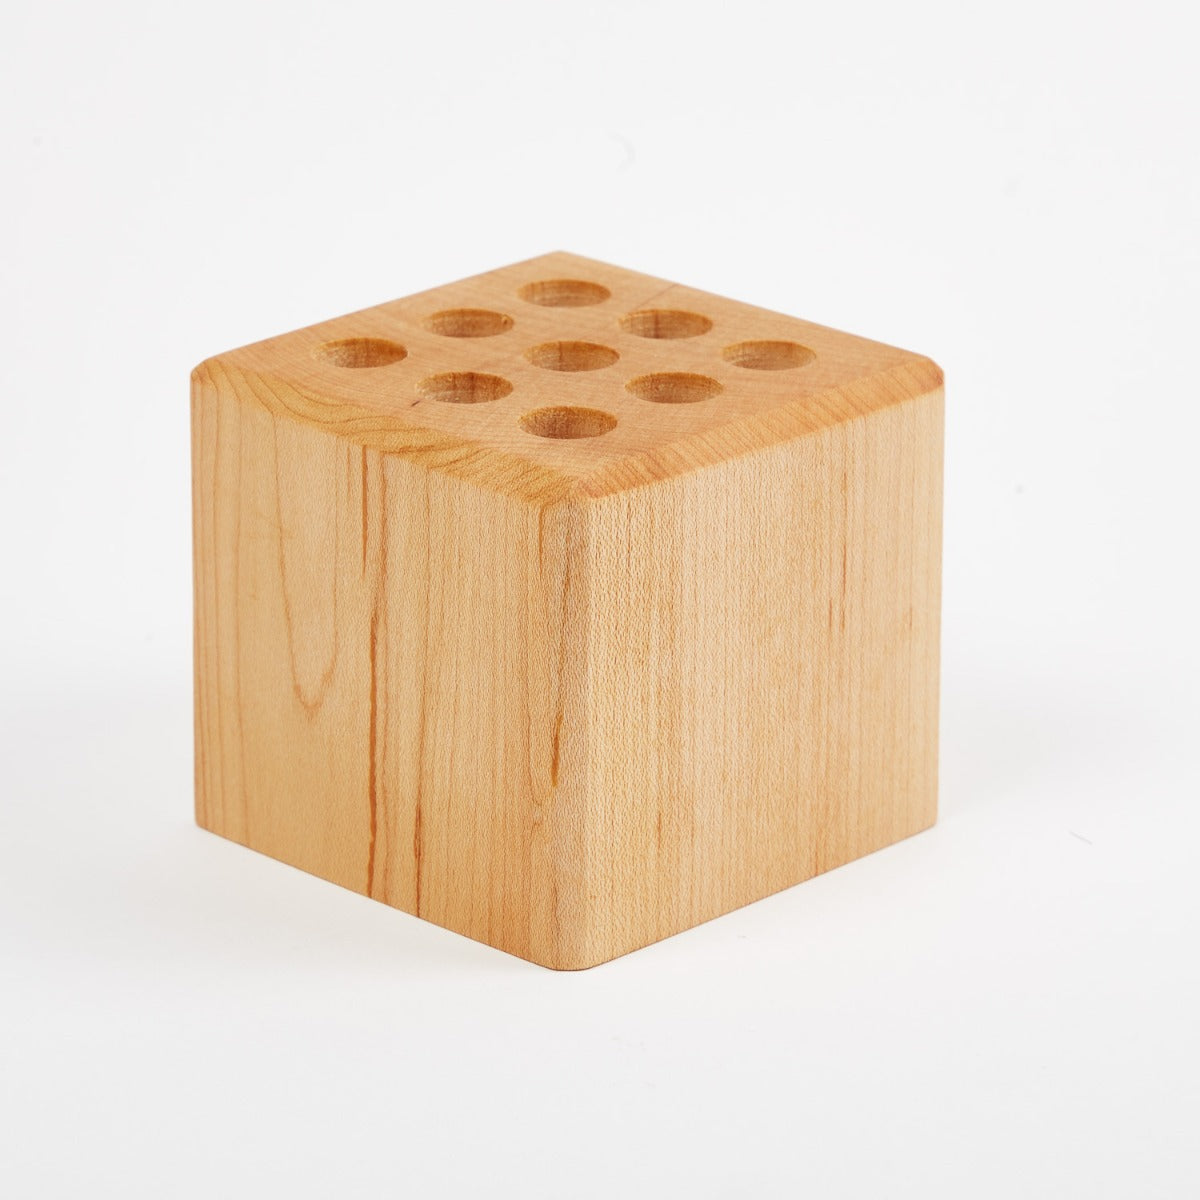 A premium wooden cube with holes in it, perfect as a Hanger Project Large Collar Stay Holder from KirbyAllison.com.